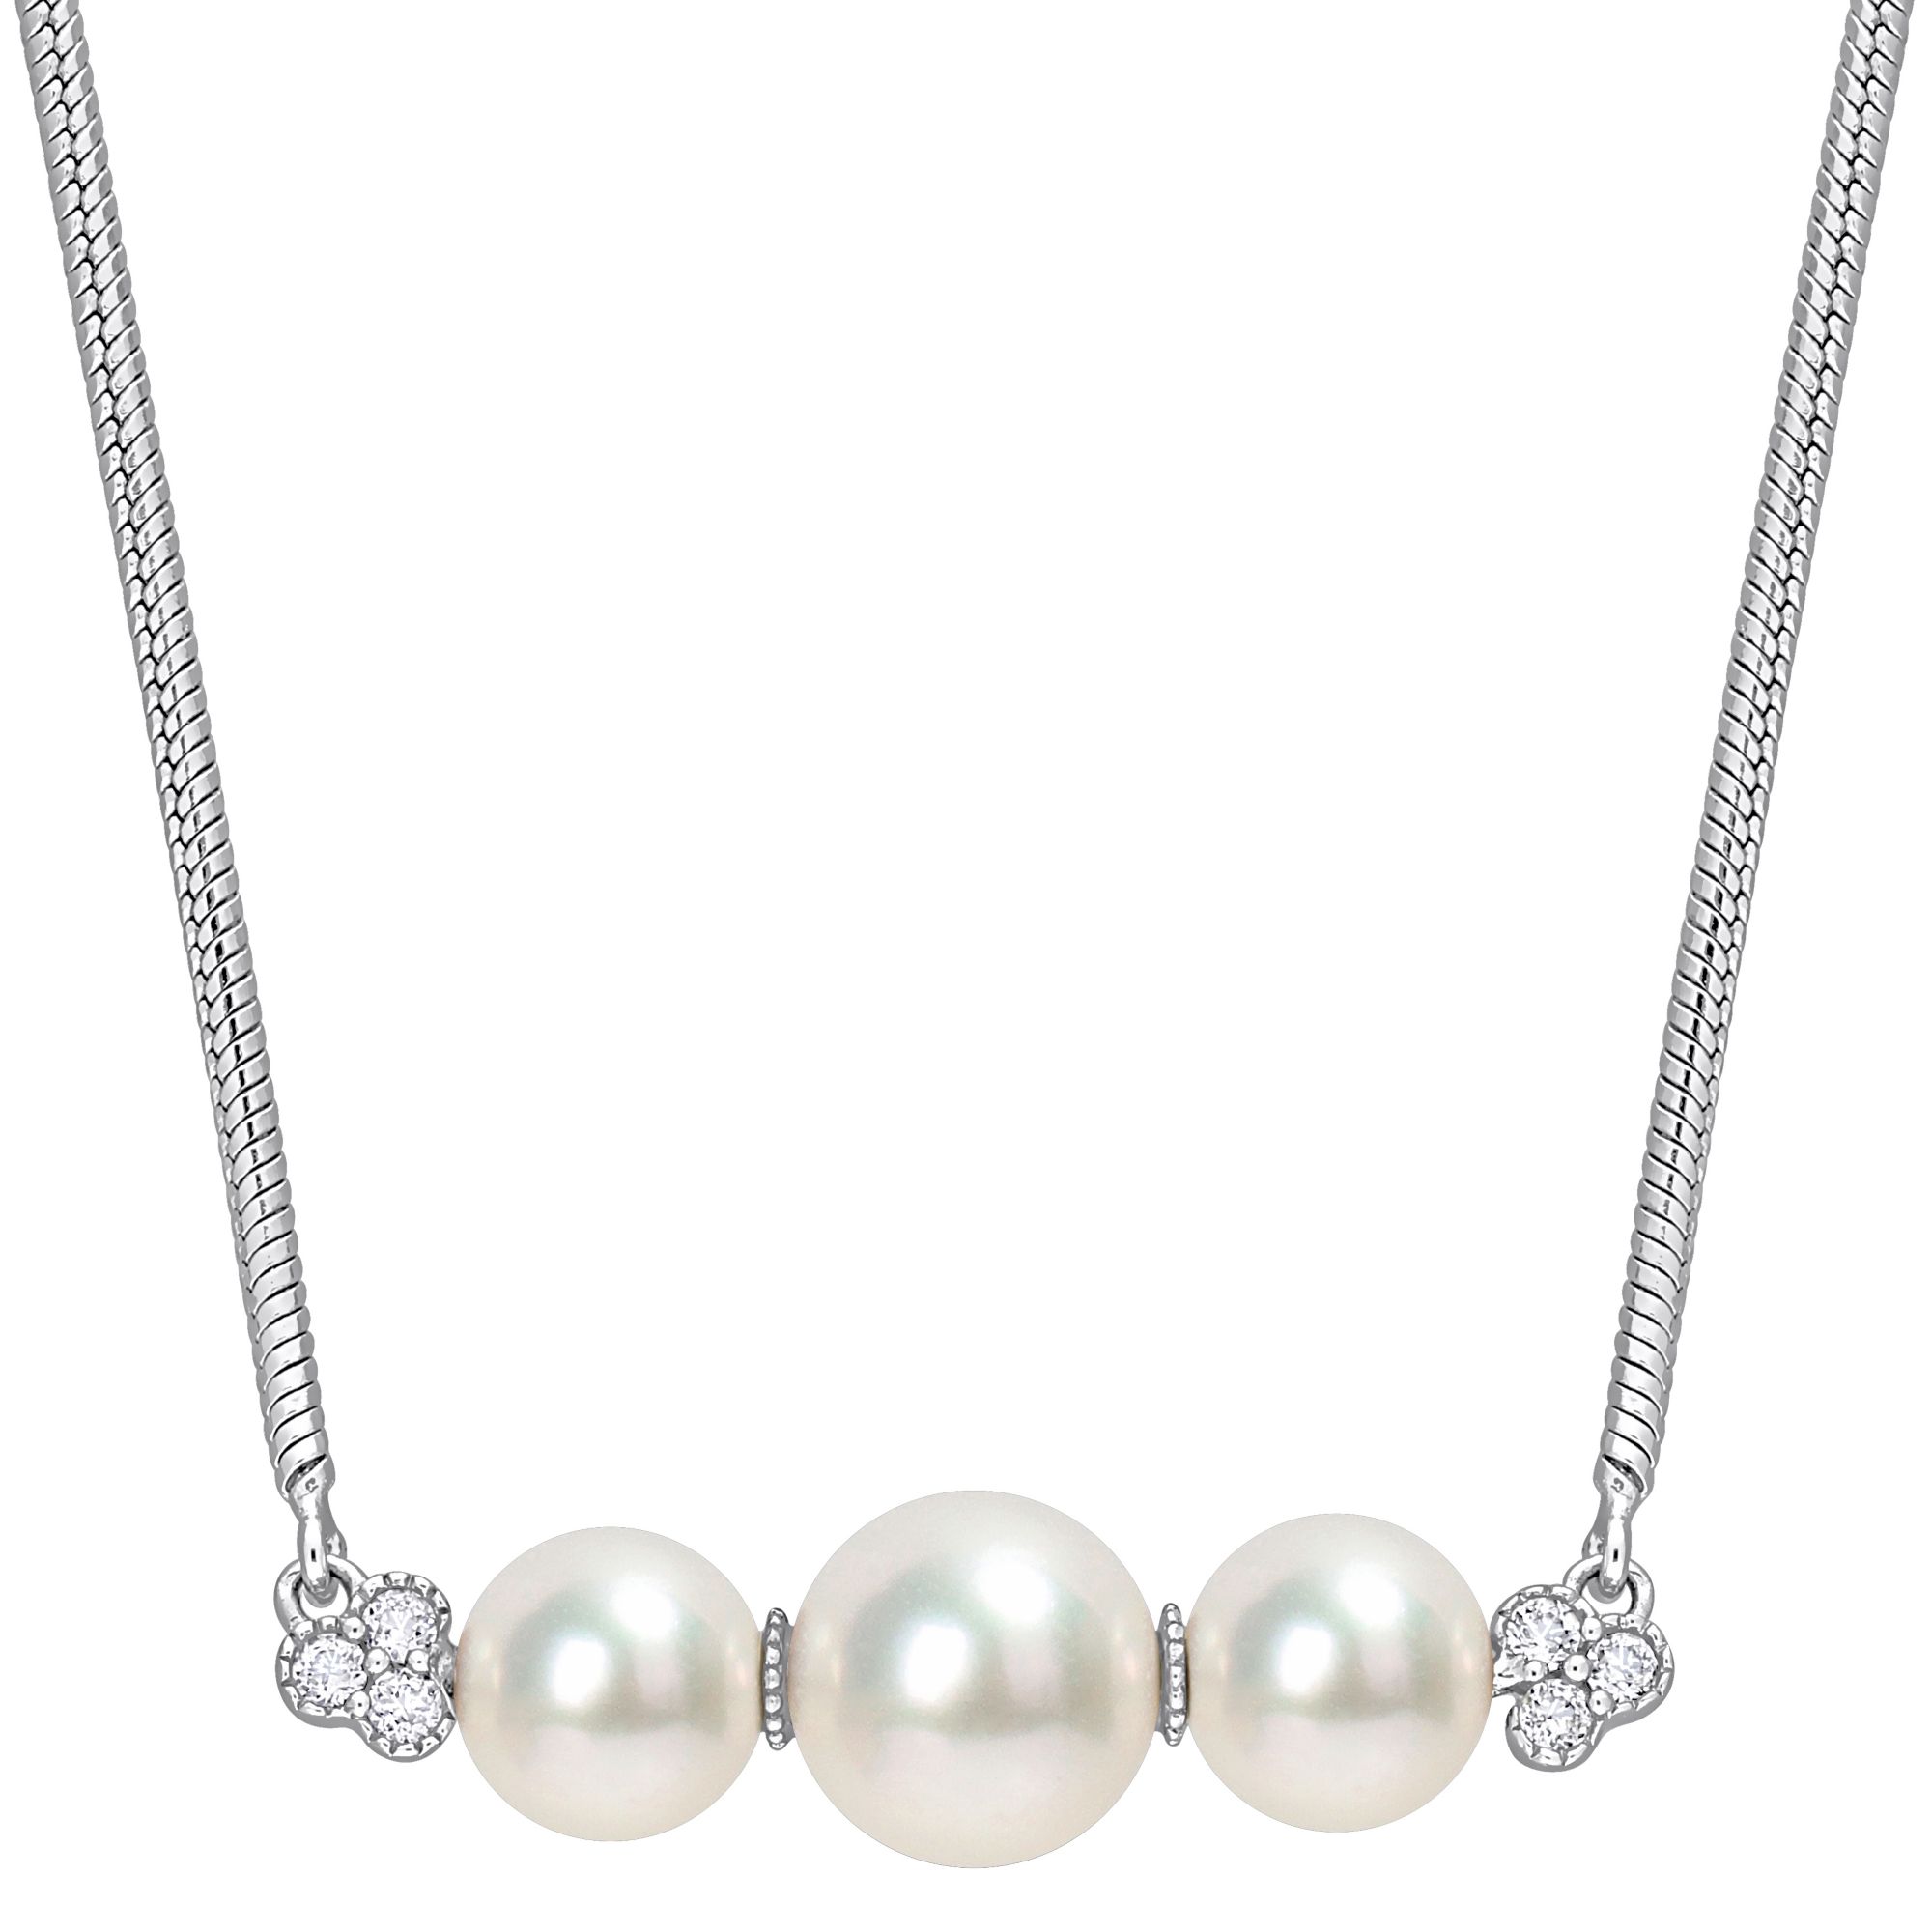 6-7.5mm Cultured Freshwater Pearl and 0.2 ct. t.g.w. White Topaz Bar Necklace in Sterling Silver